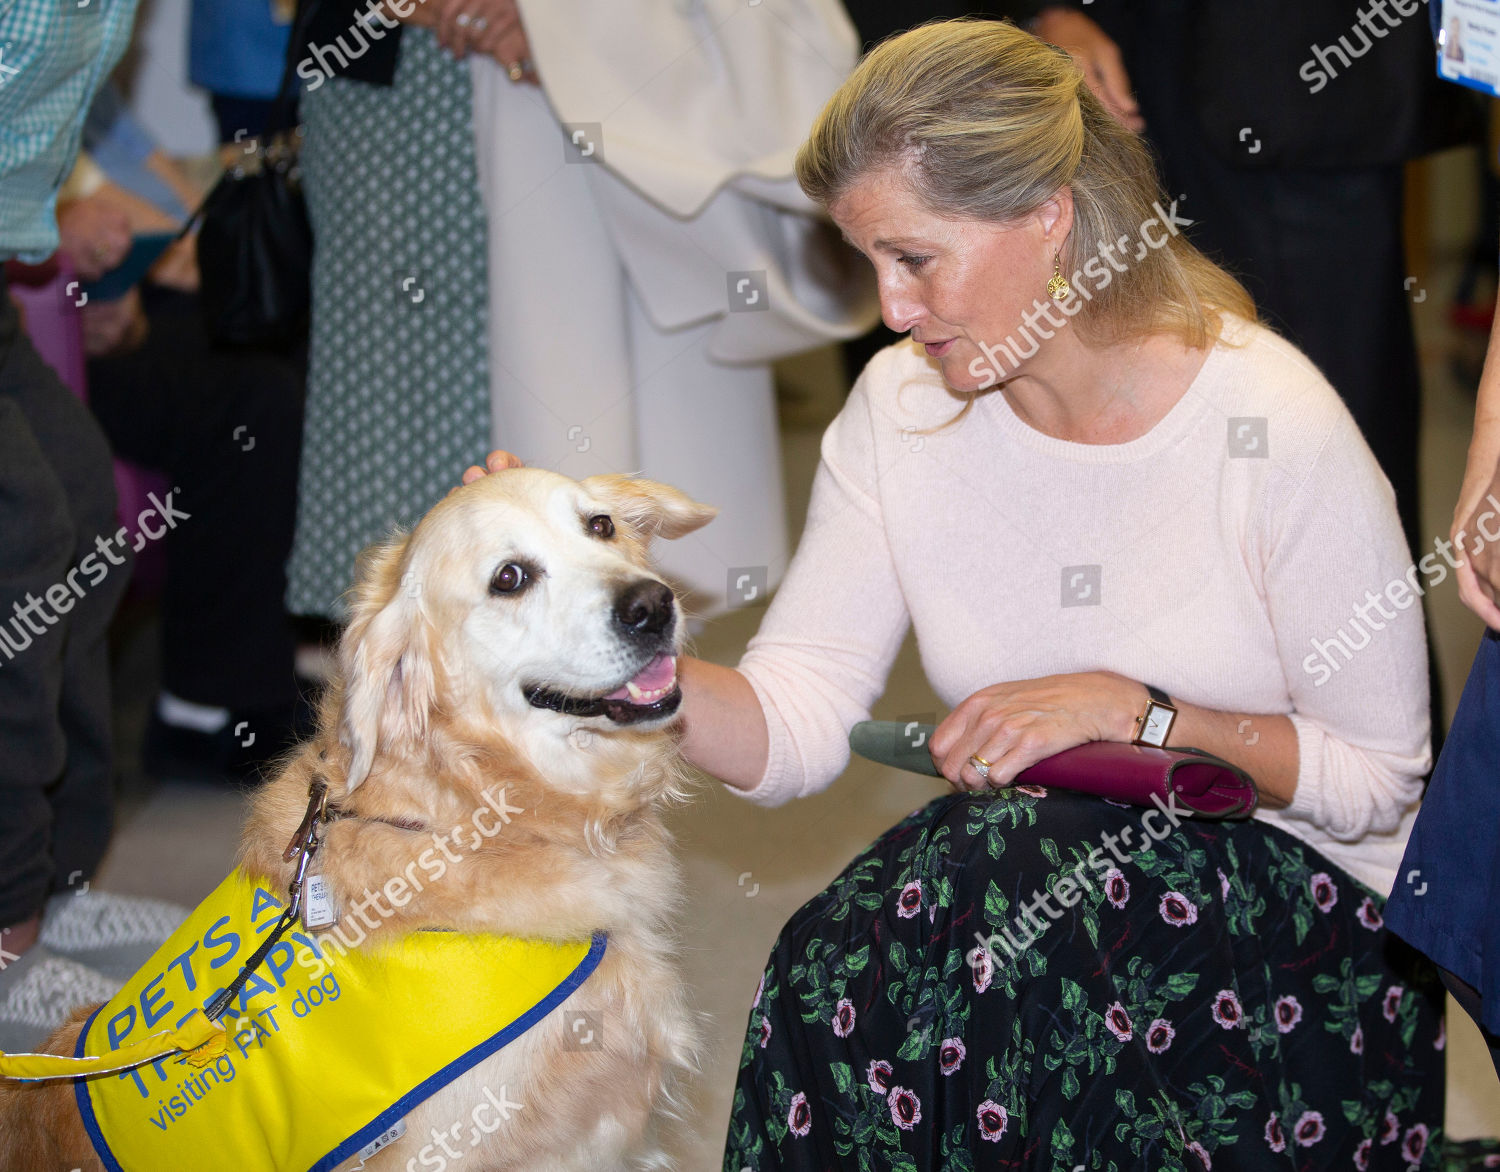 sophie-countess-of-wessex-visit-to-musgrove-park-hospital-taunton-somerset-uk-shutterstock-editorial-10422506f.jpg